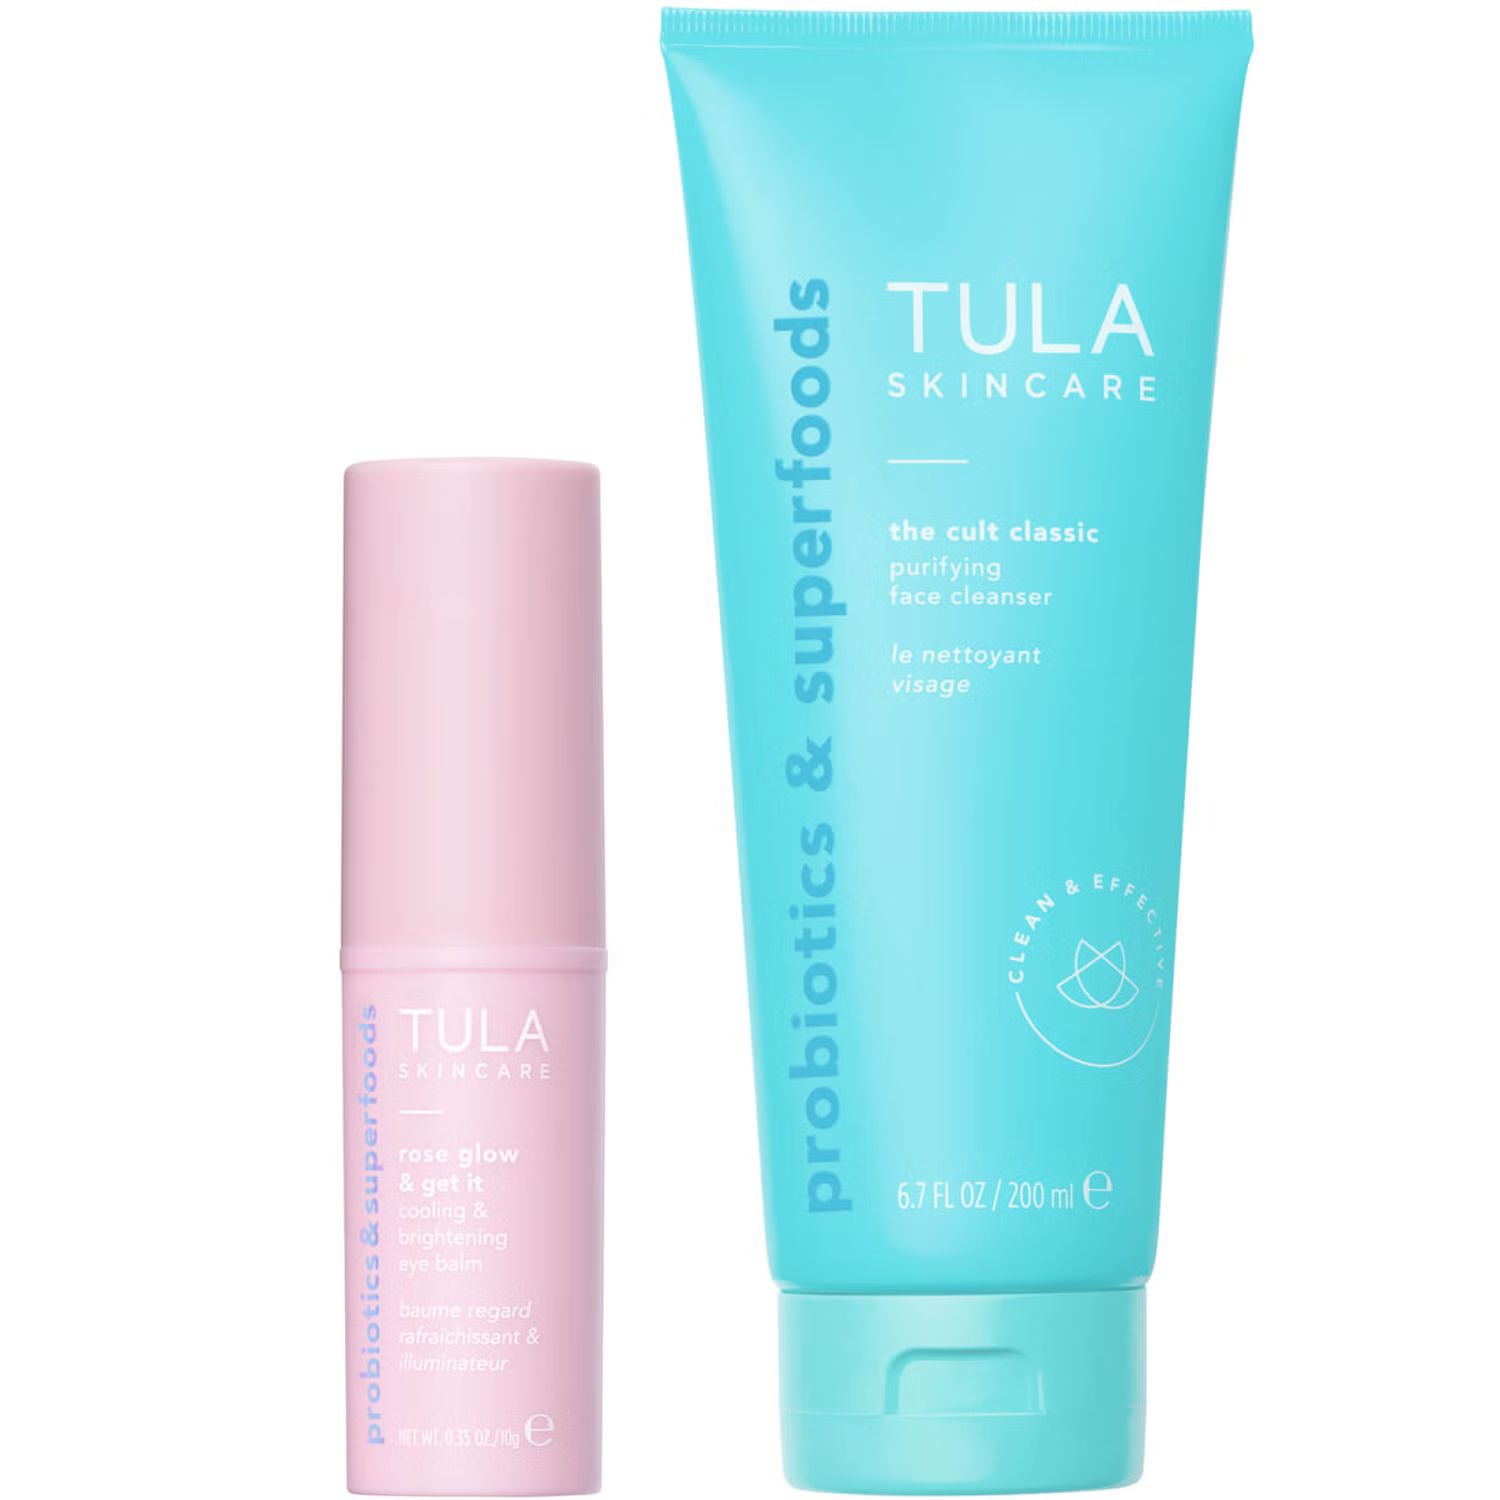 TULA Skincare Cleanse & Glow Iconic Duo | Dermstore (US)